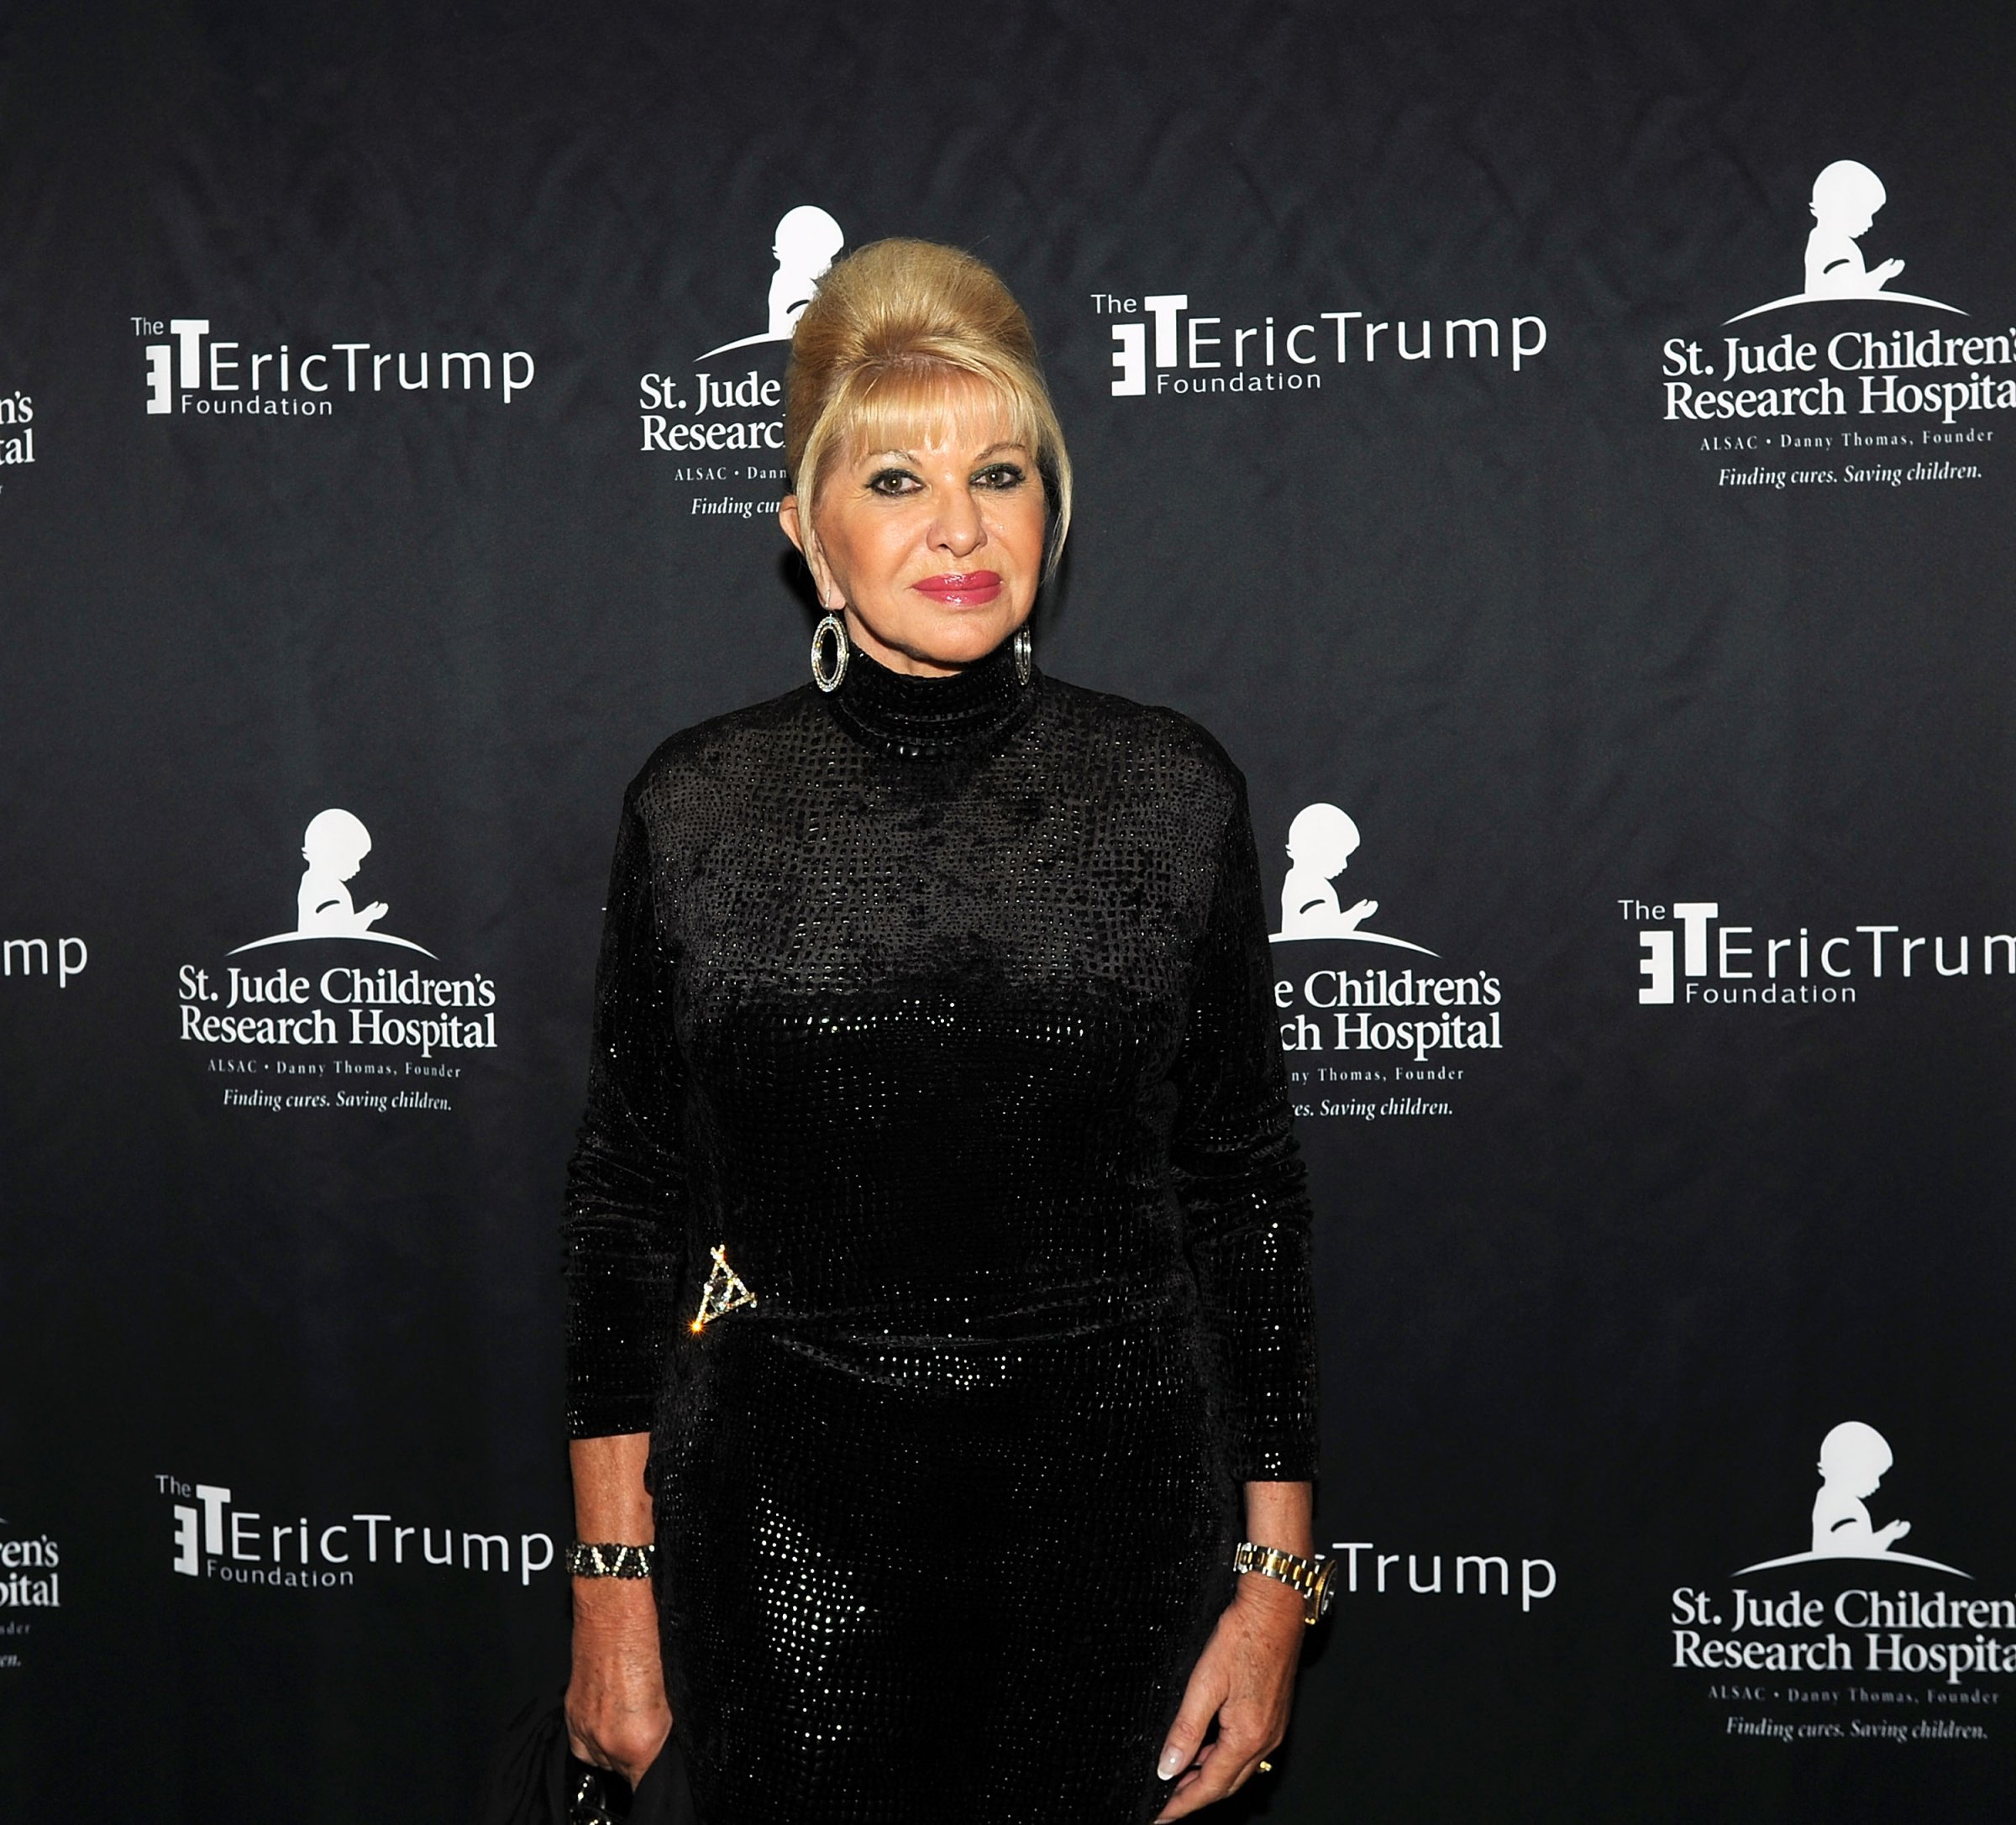 vana Trump attends the 9th Annual Eric Trump Foundation golf invitational at Trump National Golf Club Westchester on September 21, 2015 in Briarcliff Manor City